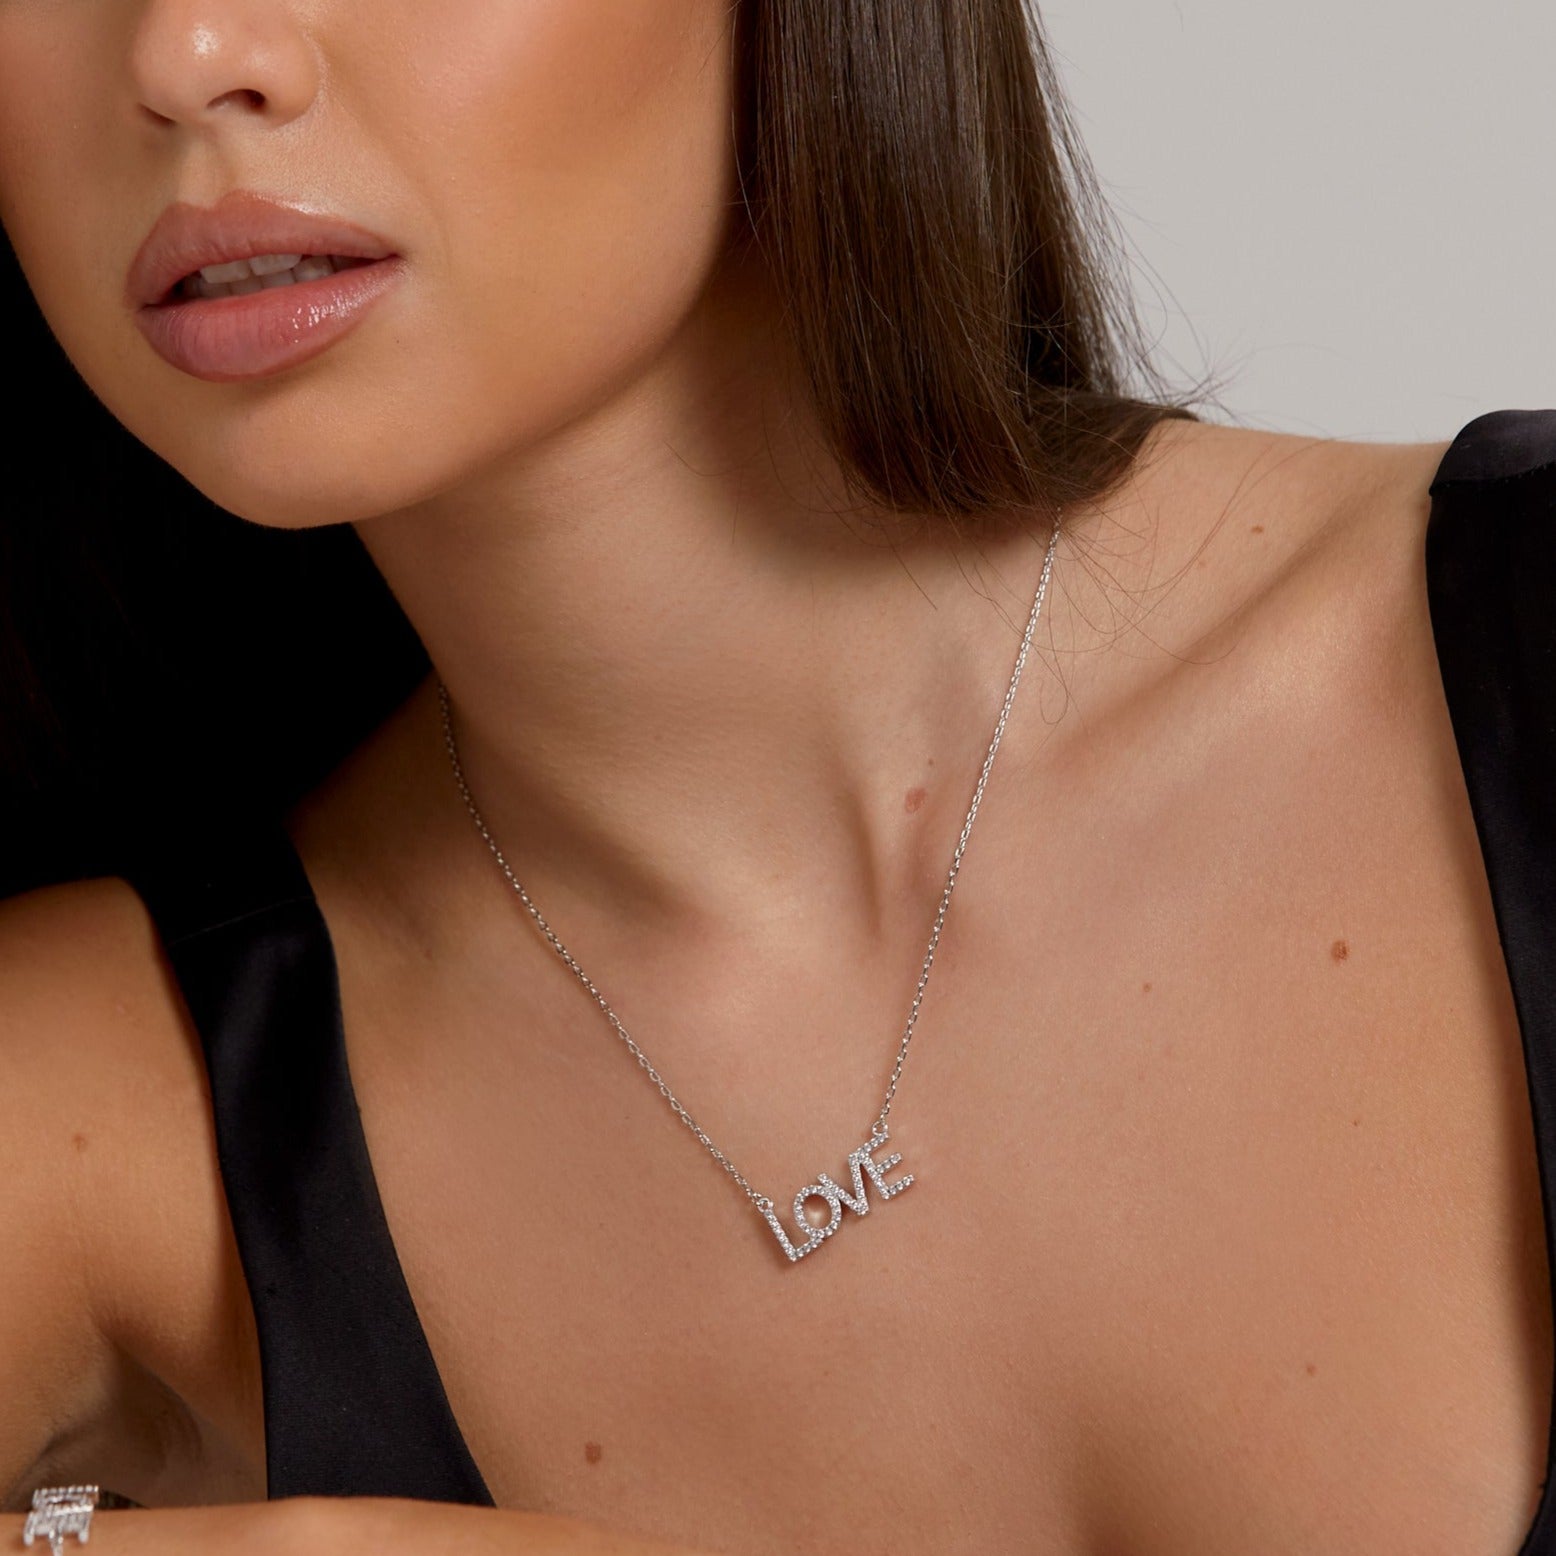 Love Necklace (Silver)